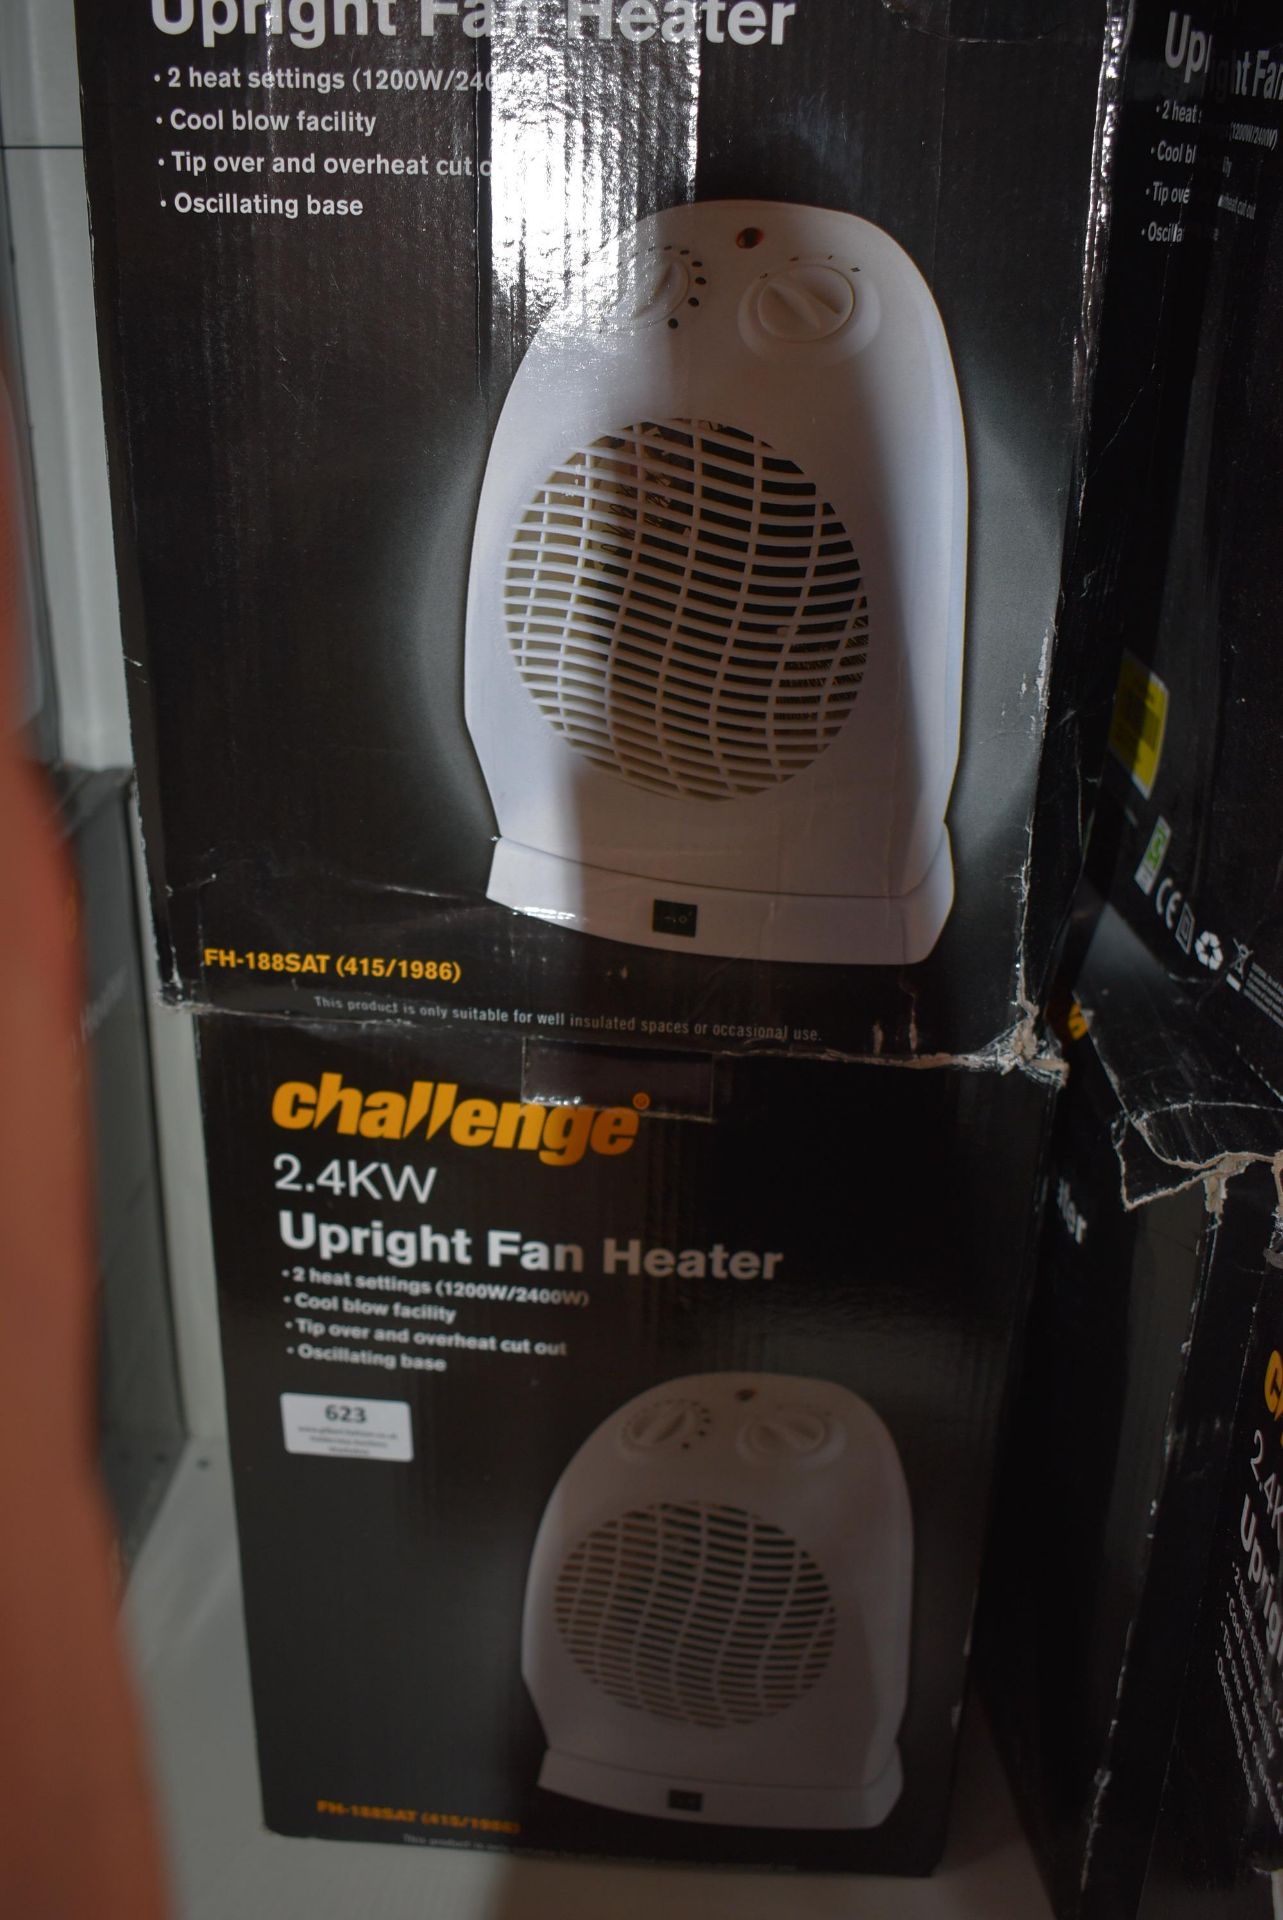 Two Challenge Upright Fan Heaters - Image 2 of 2